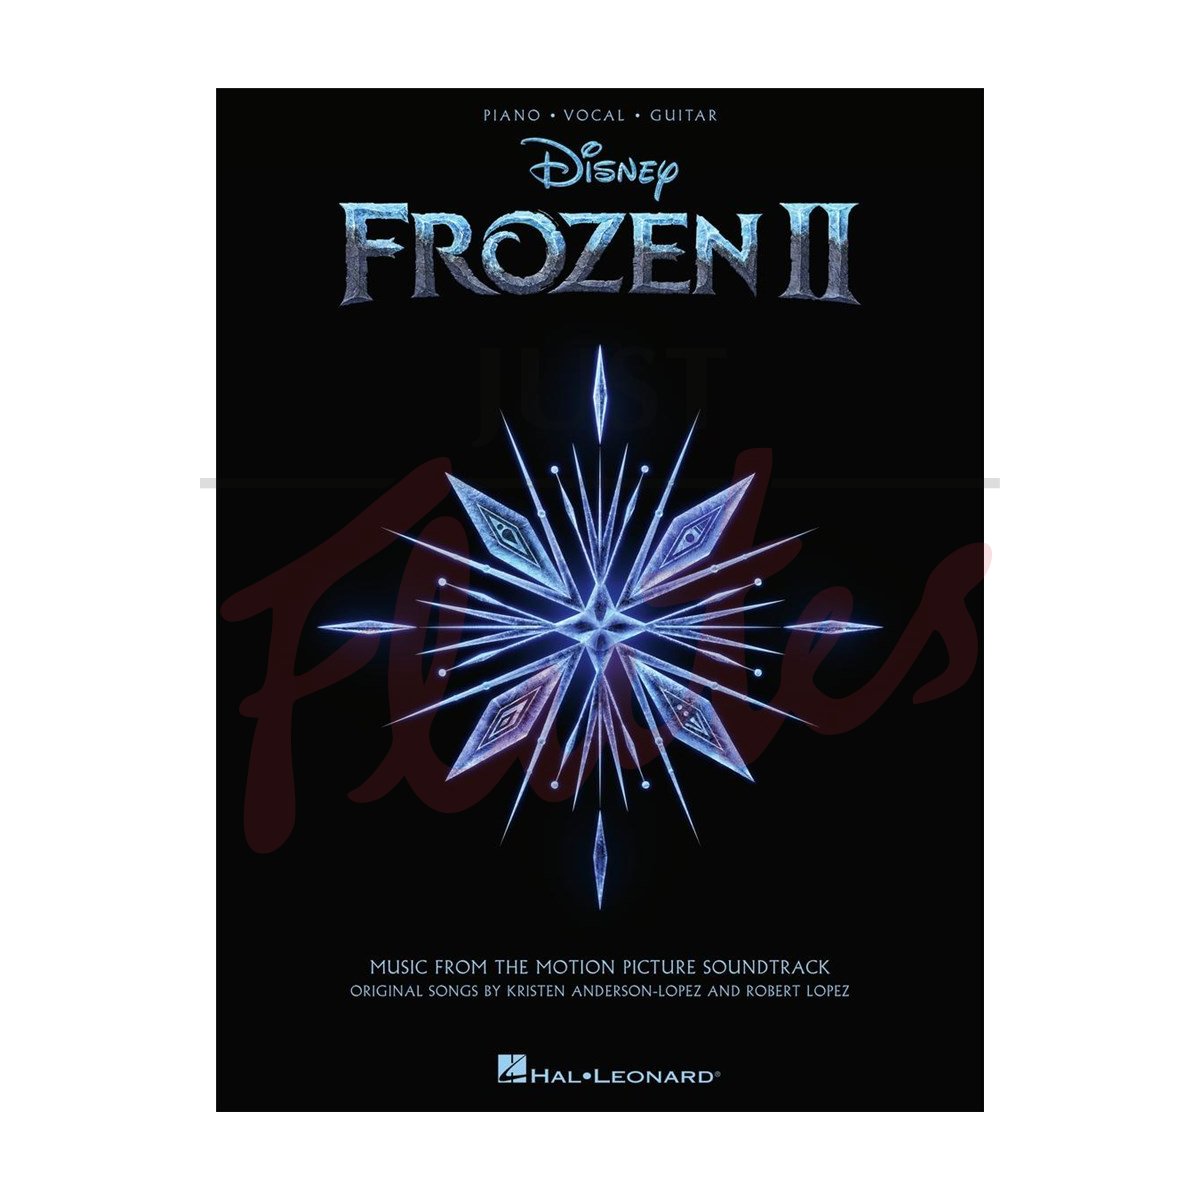 Frozen II for Piano, Vocal and Guitar